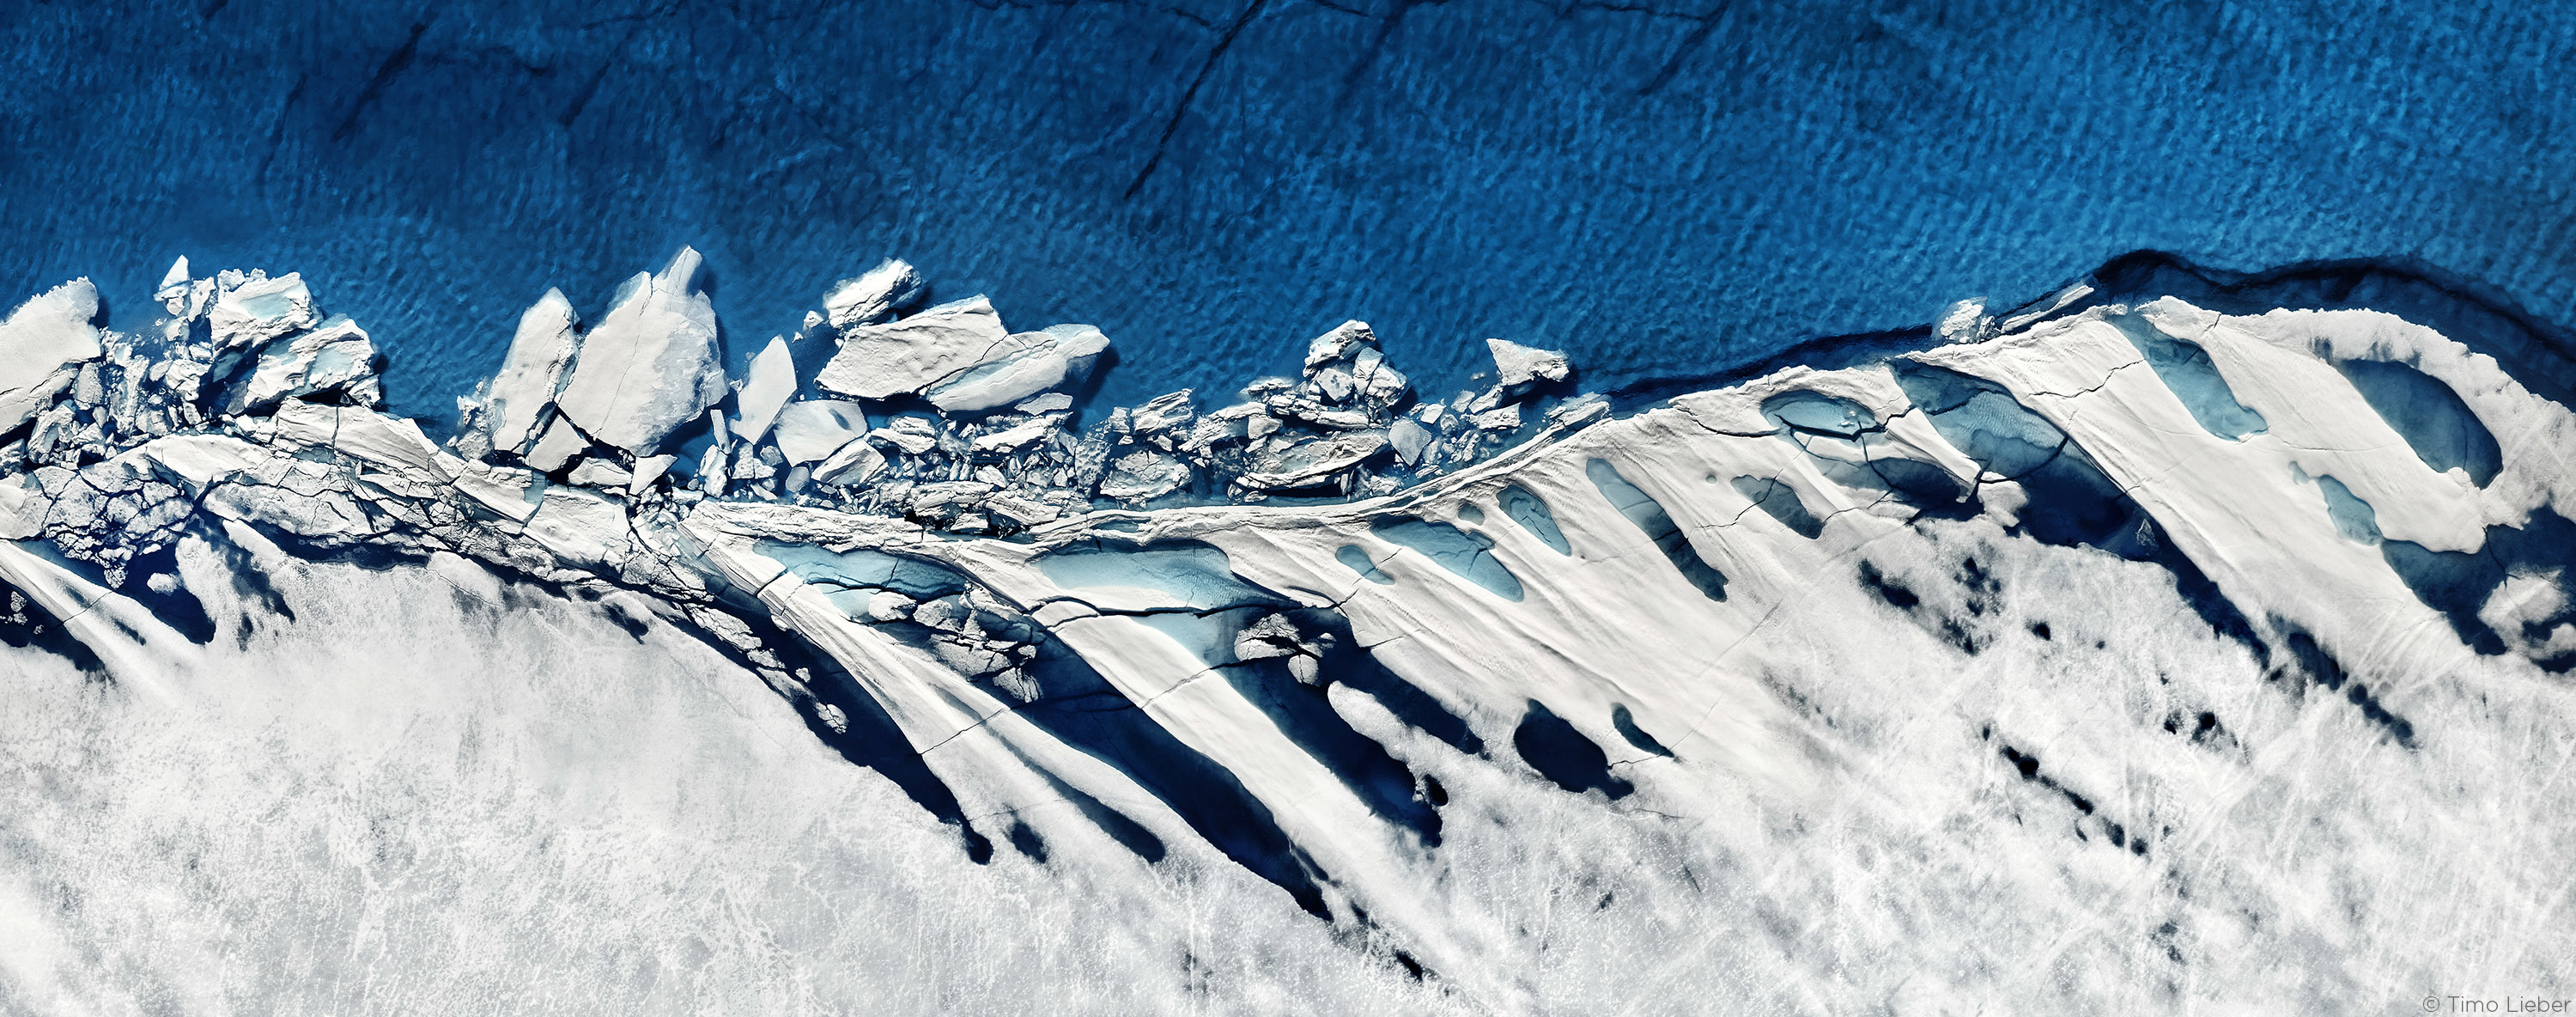 Glaciers Arctic Iceberg Snow Ice Water Blue Birds Eye View Aerial View Melting 3000x1184